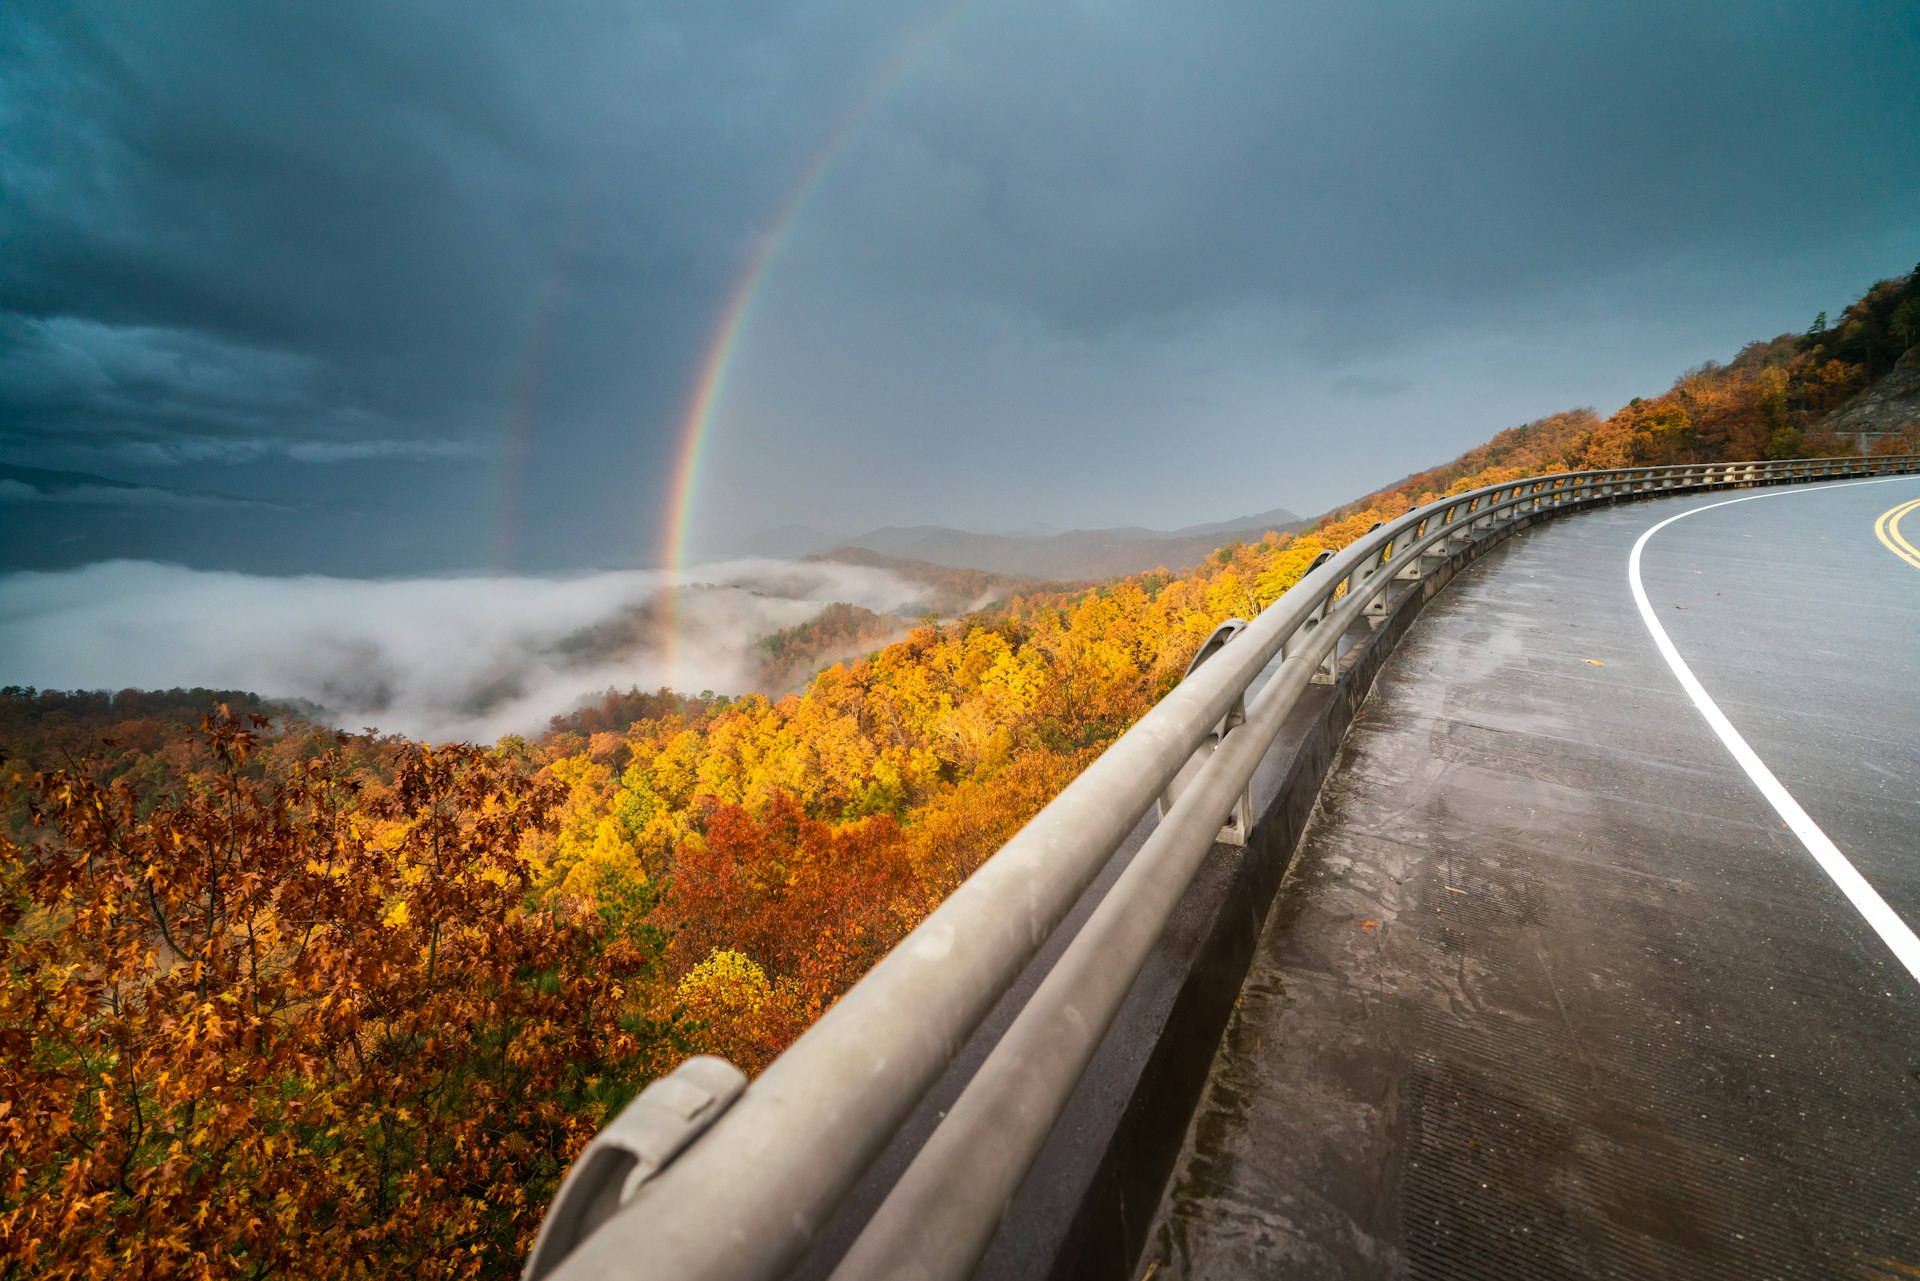 Gorgeous rainbow on an autumn day along the Foothills Parkway in Wears Valley in the Great Smoky Mountains National Park, USA